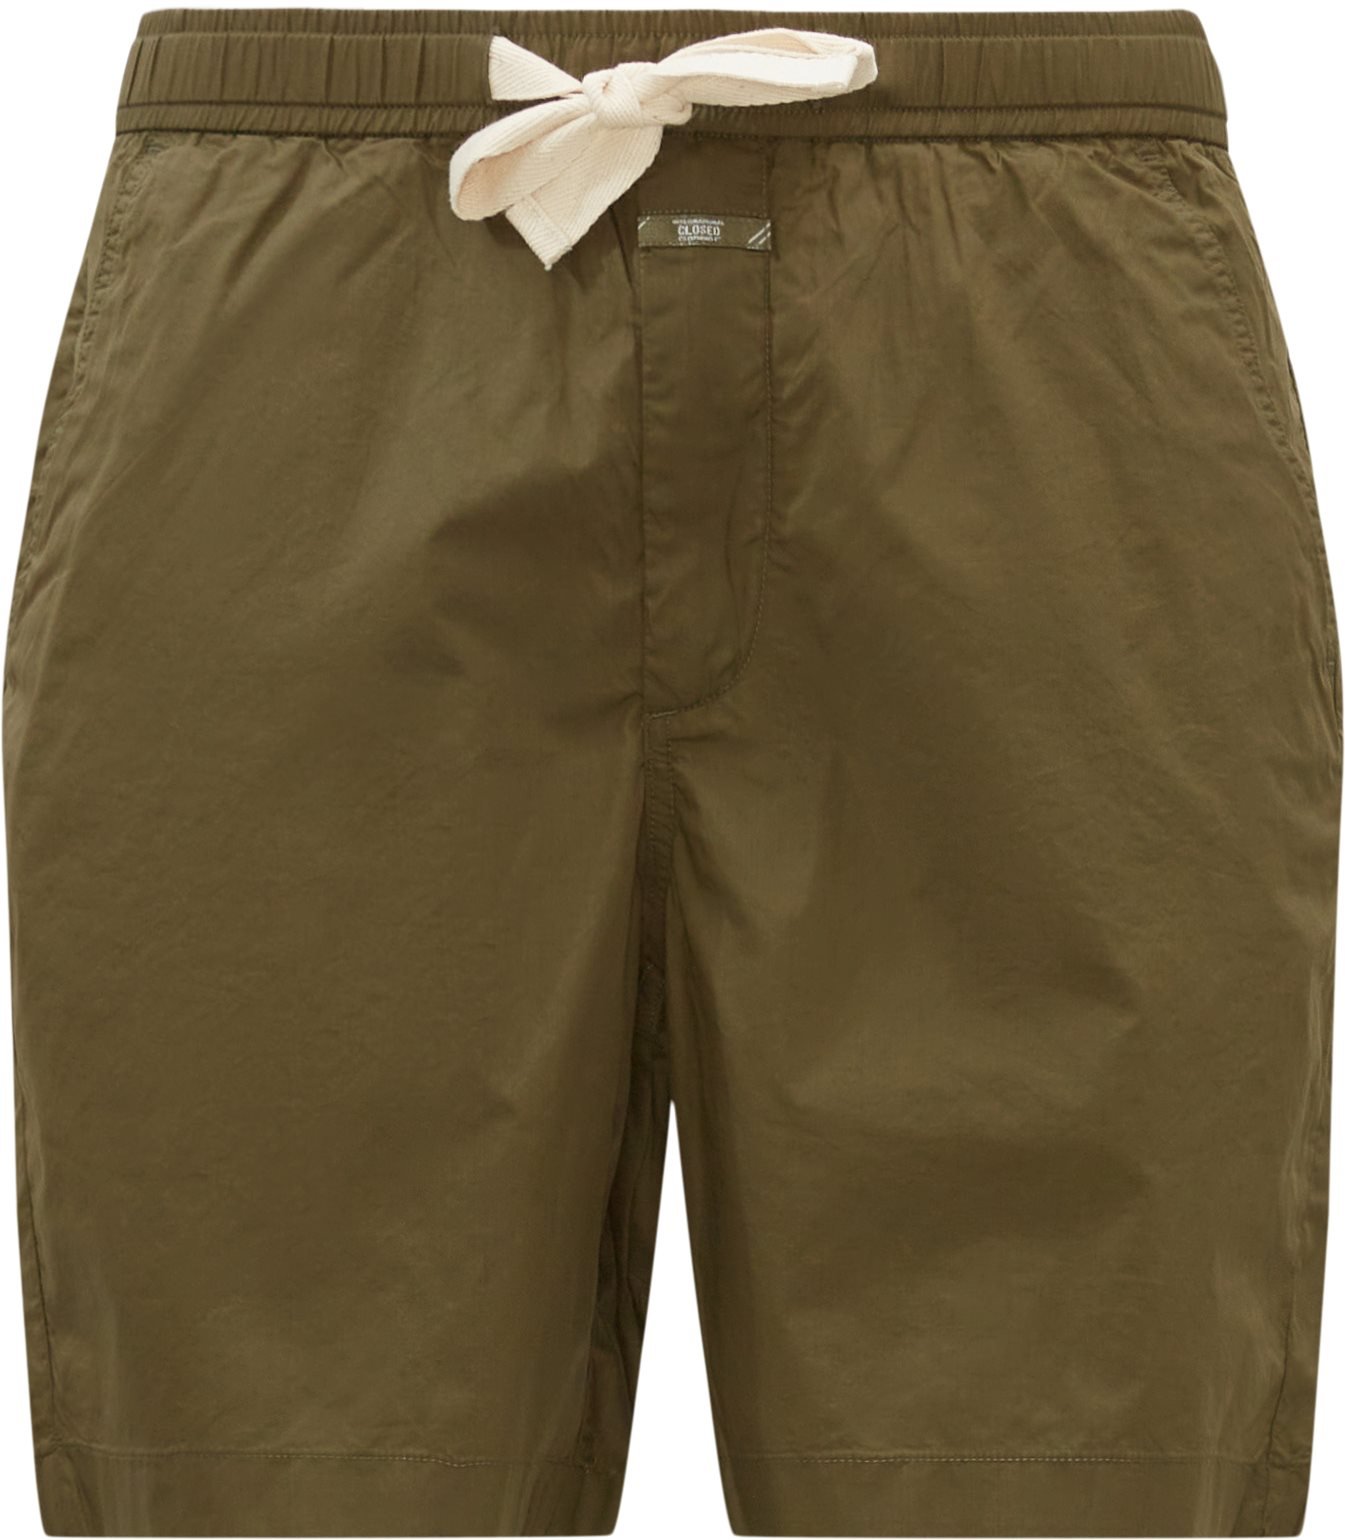 Closed Shorts C82710-53A-20 Army